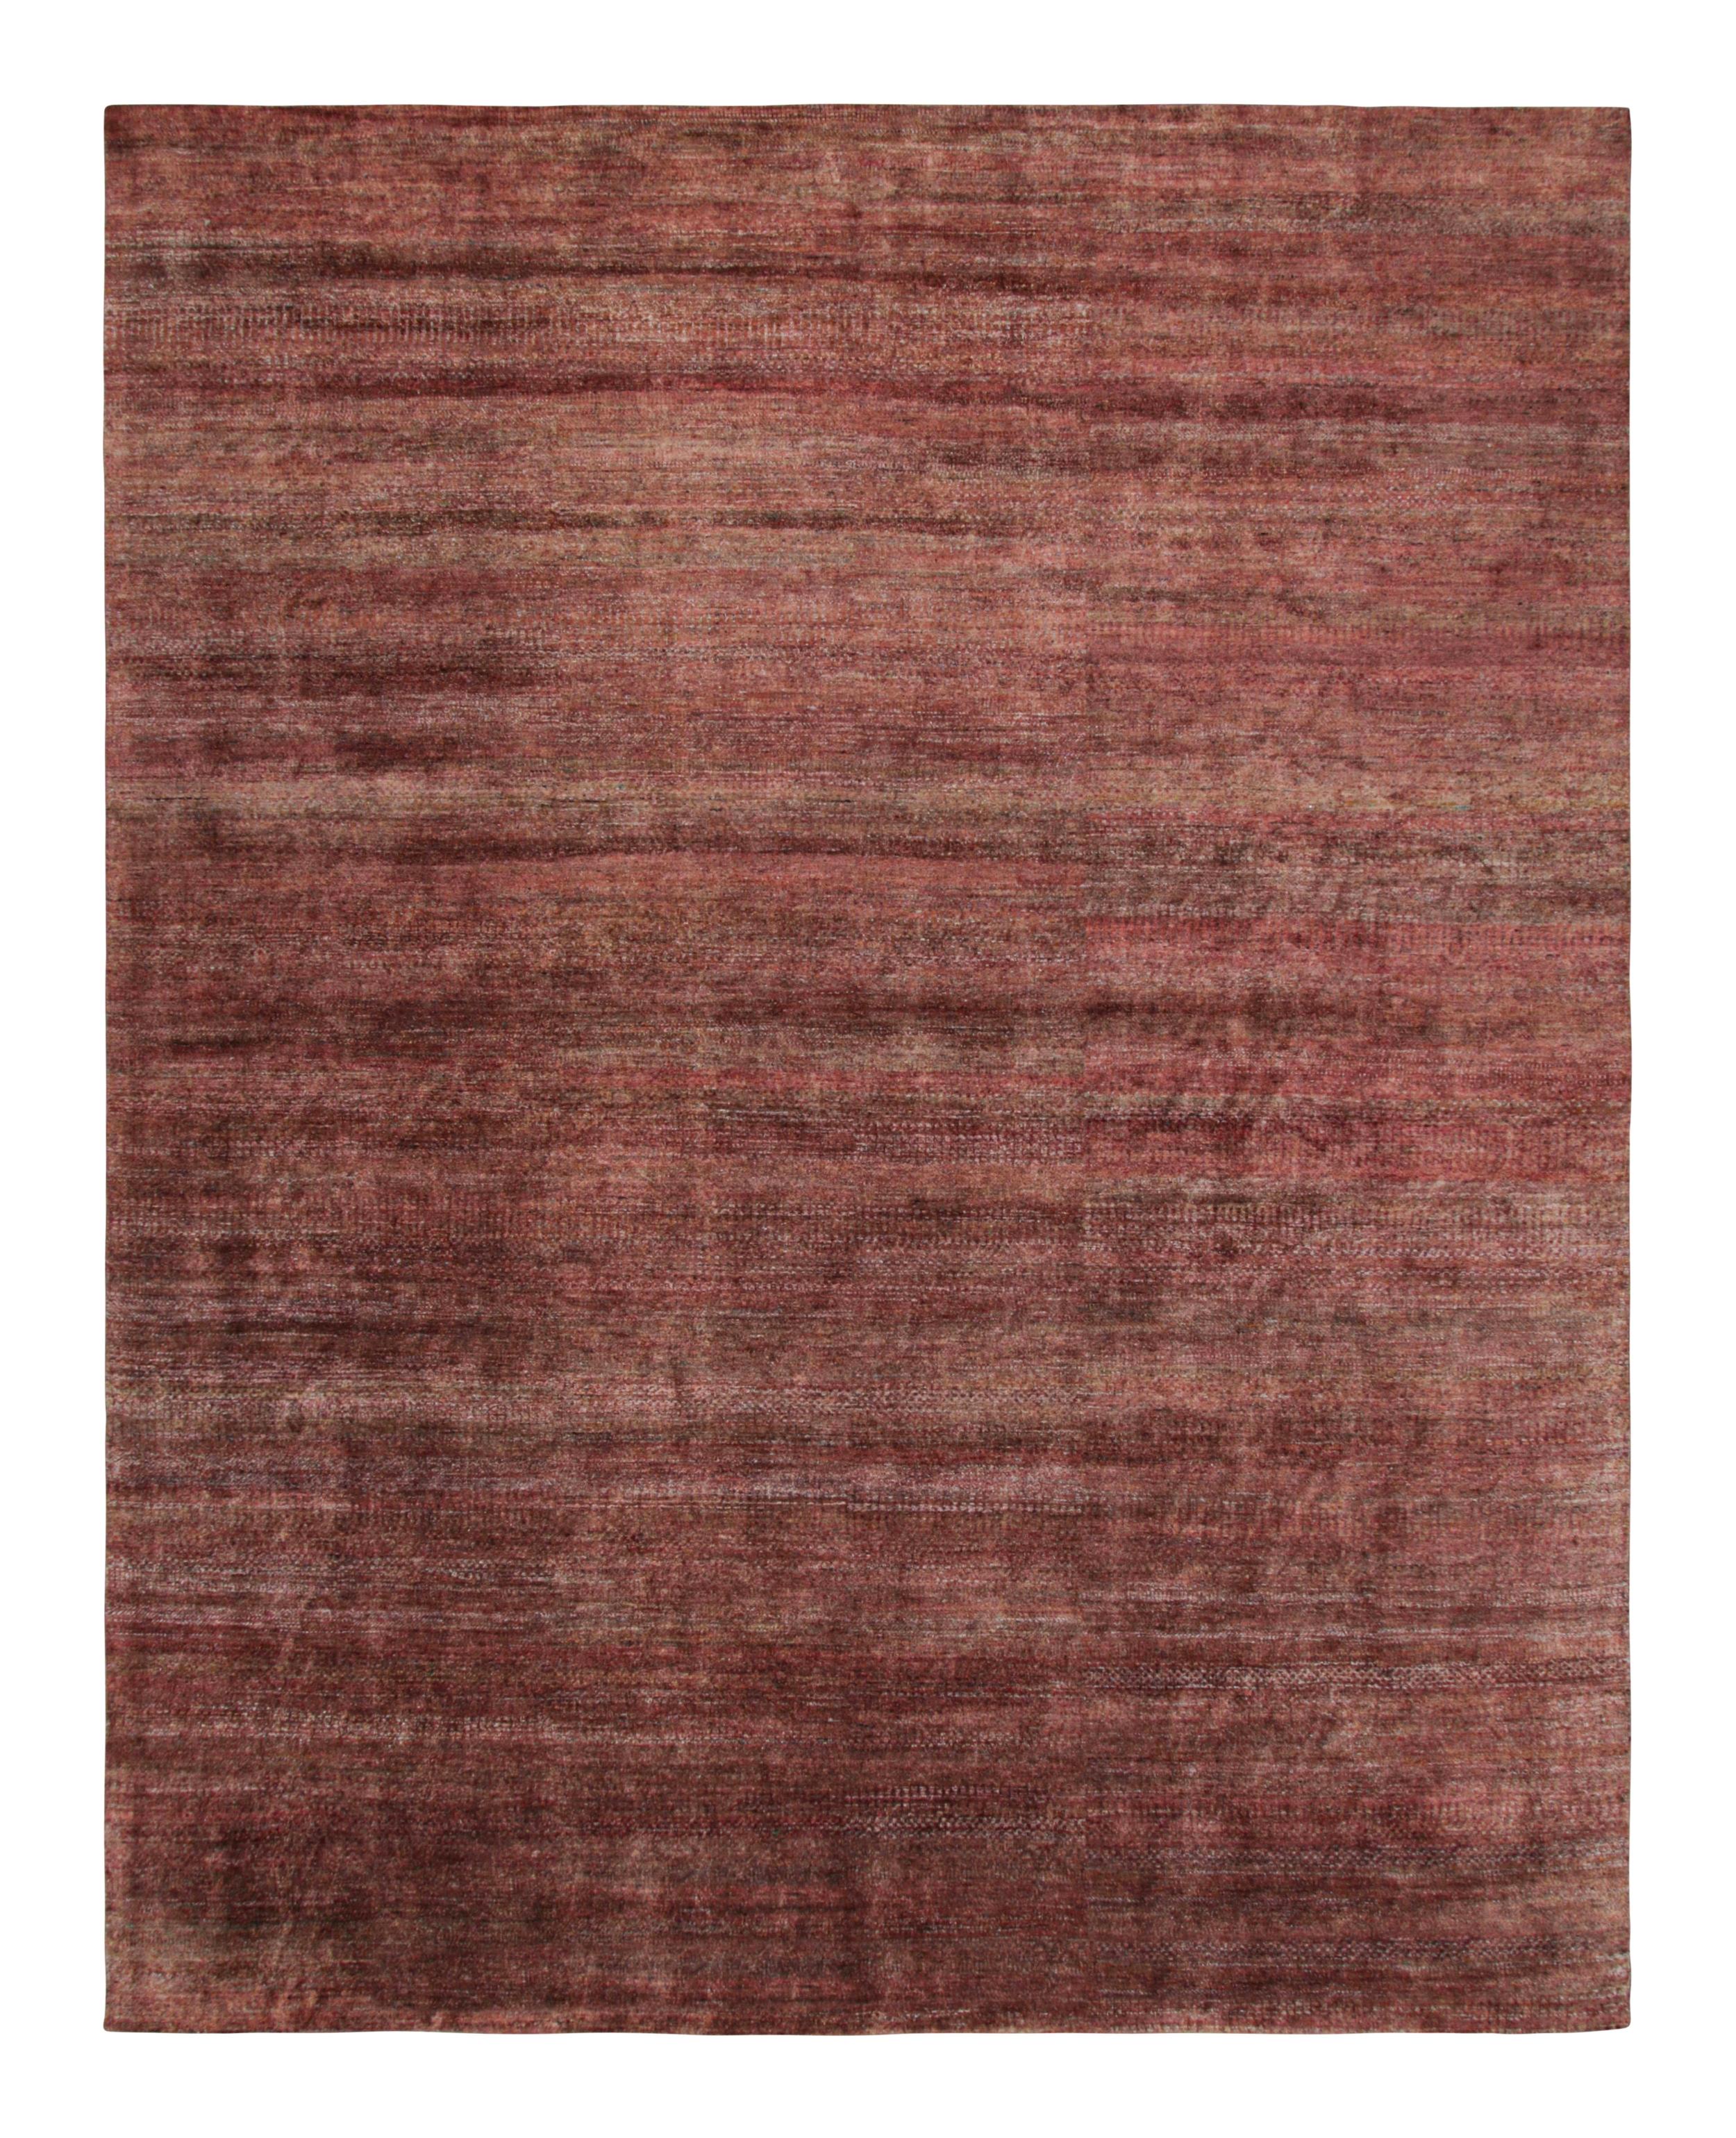 A 12x15 bold new addition to our Texture of Color collection, made with hand-knotted silk and a new take on the theme of this collection—particularly a vegetable dye like those used in antique or vintage rugs that gives these a whole new kind of